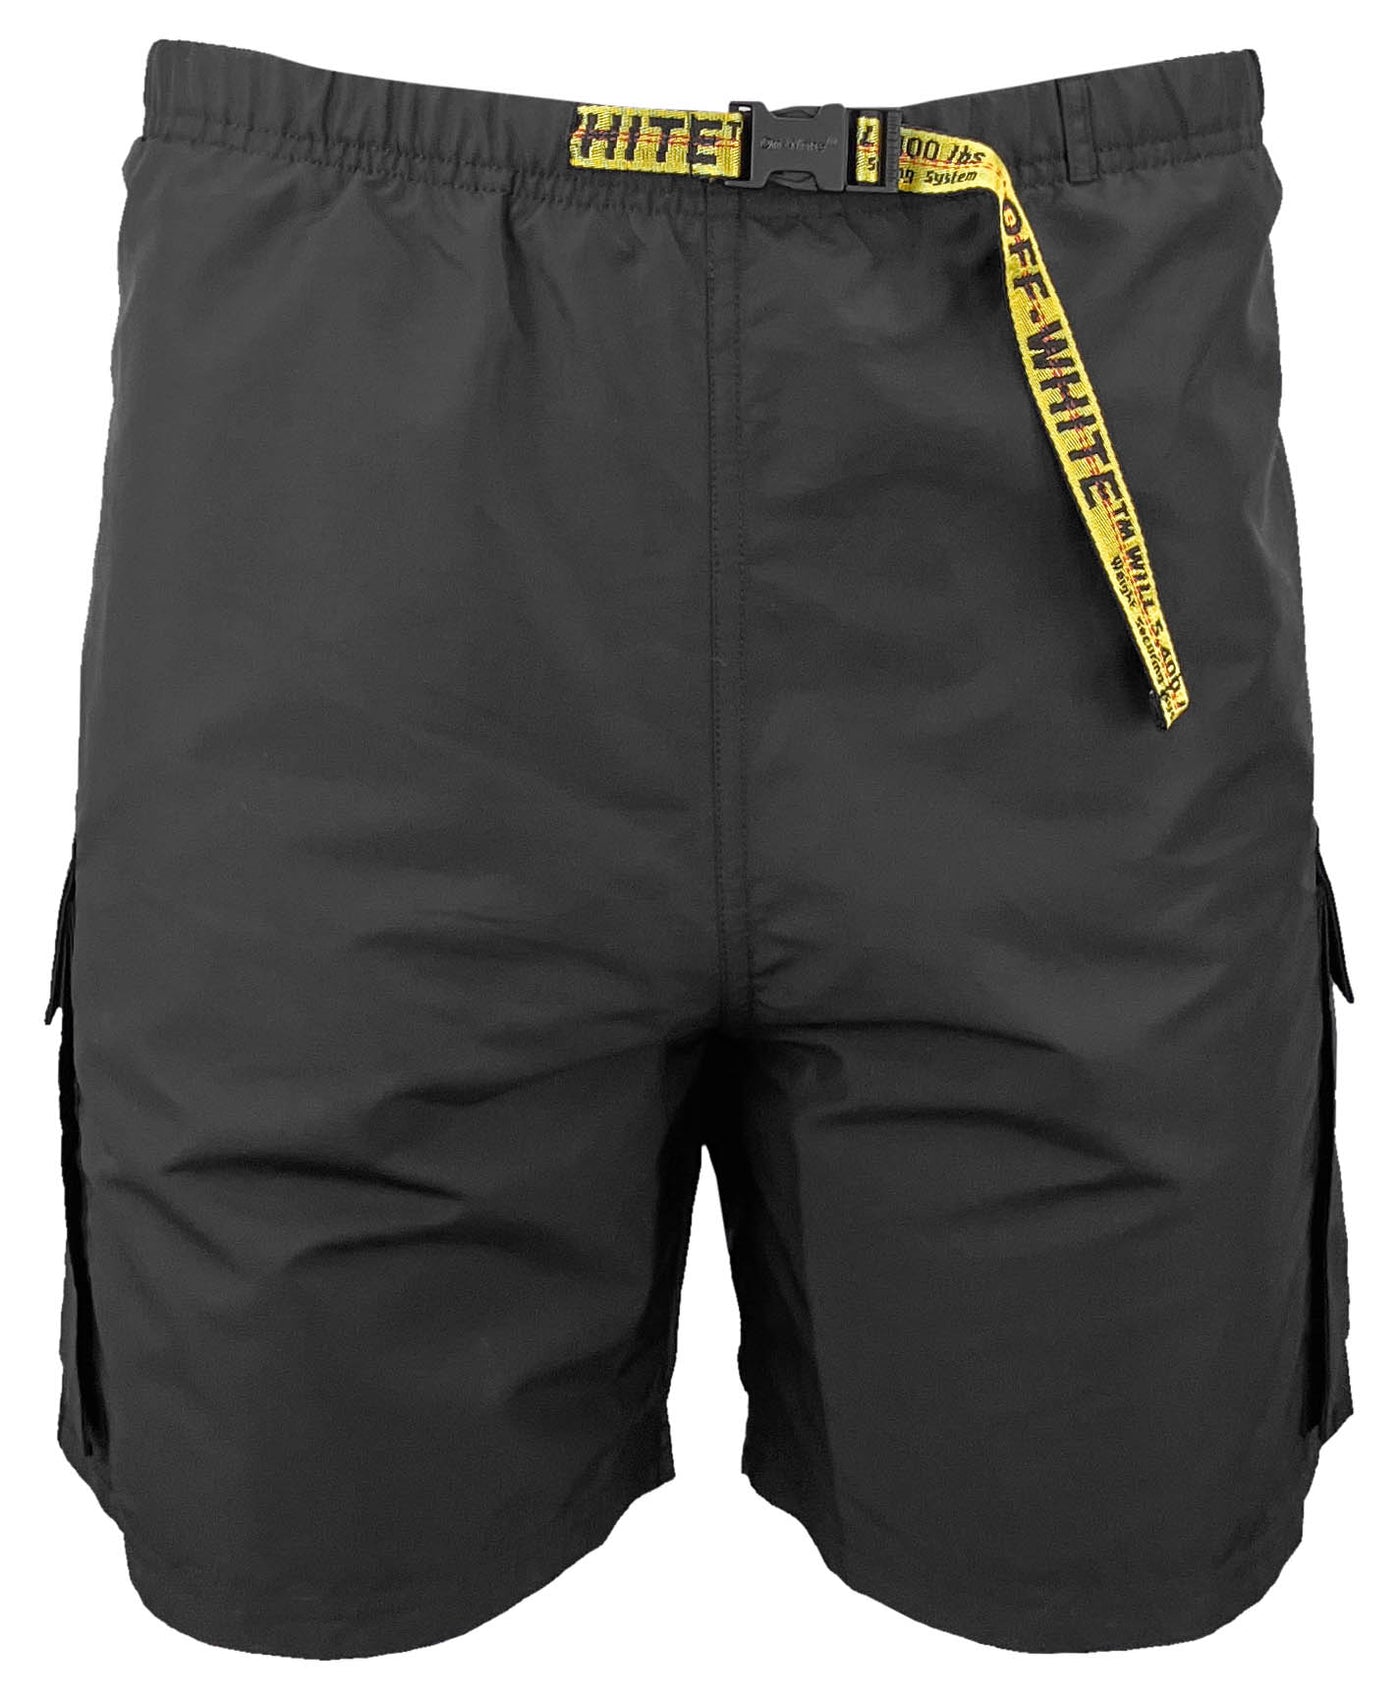 Off-White Cargo Swim Shorts in Black - Discounts on Off-White at UAL